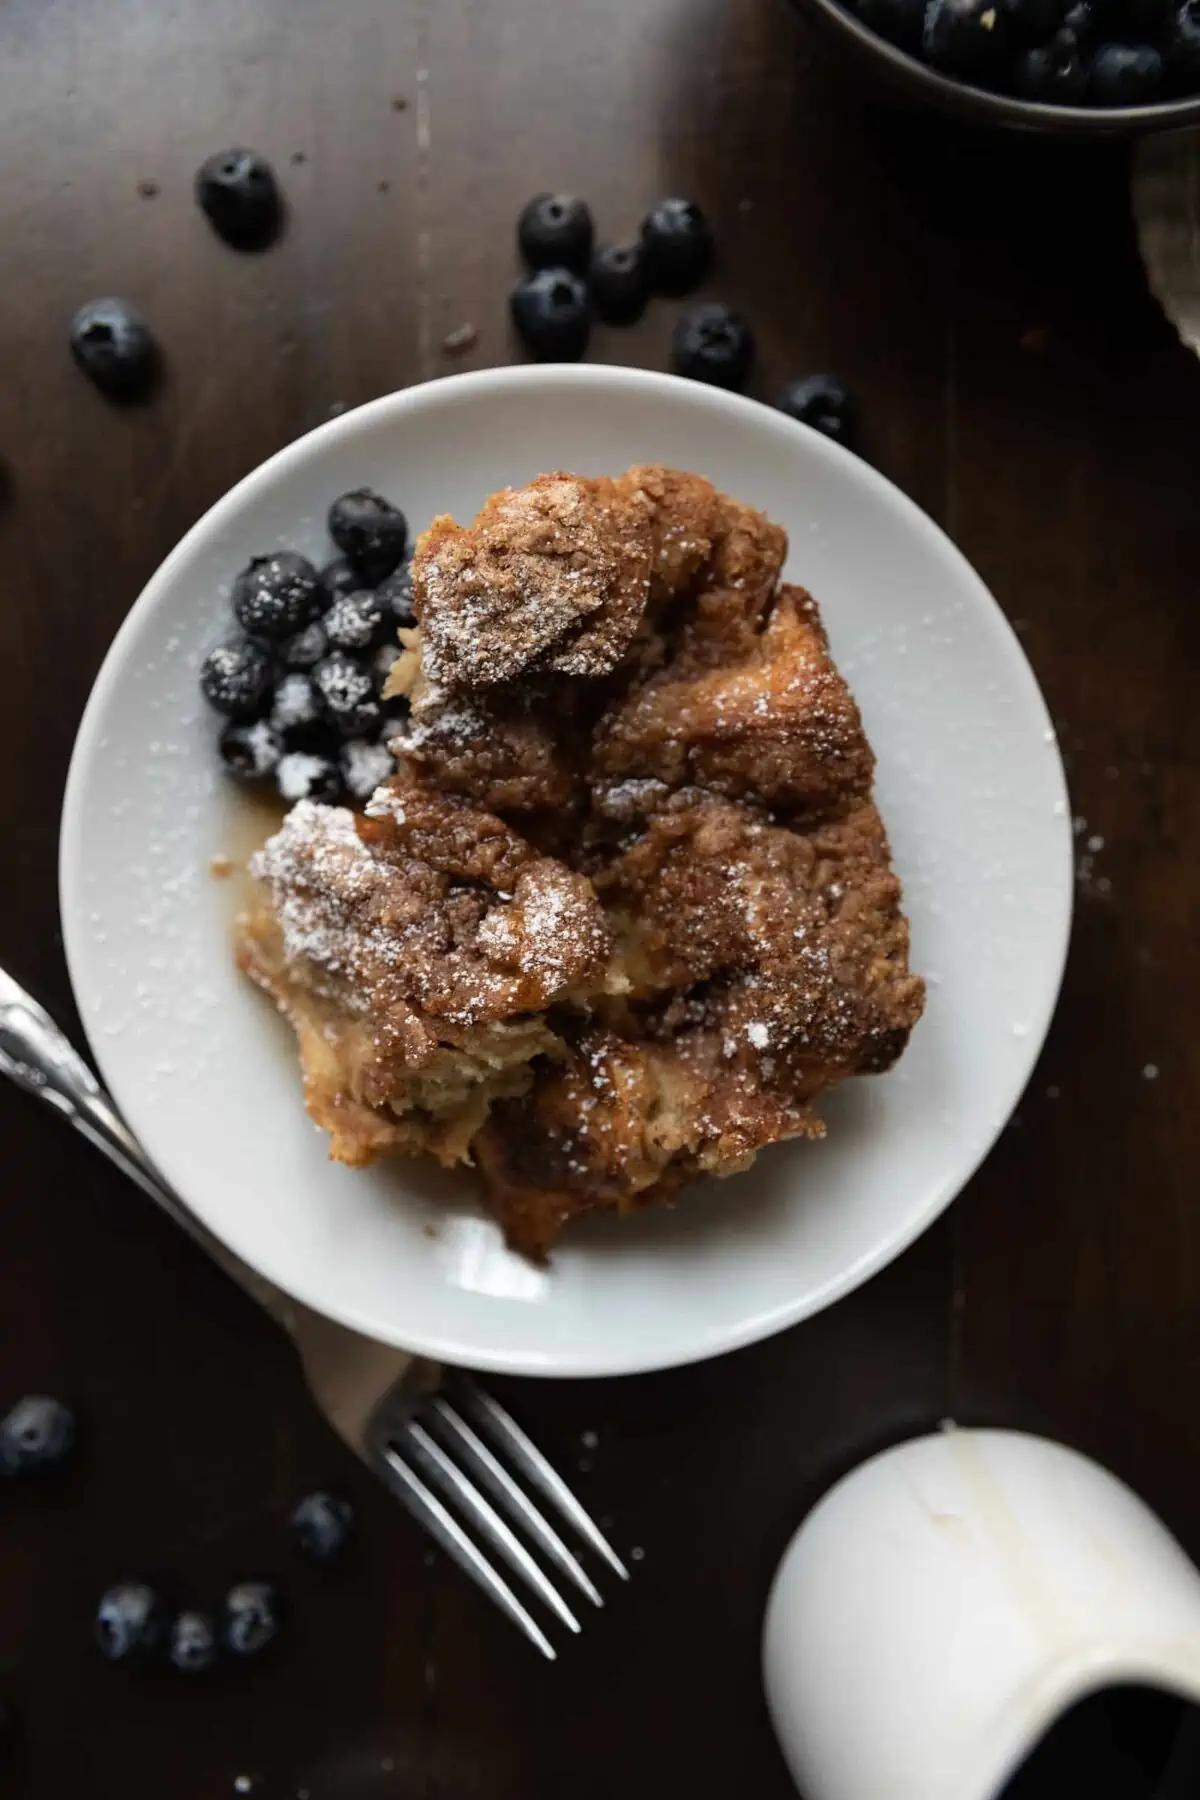 Plate of french toast bake